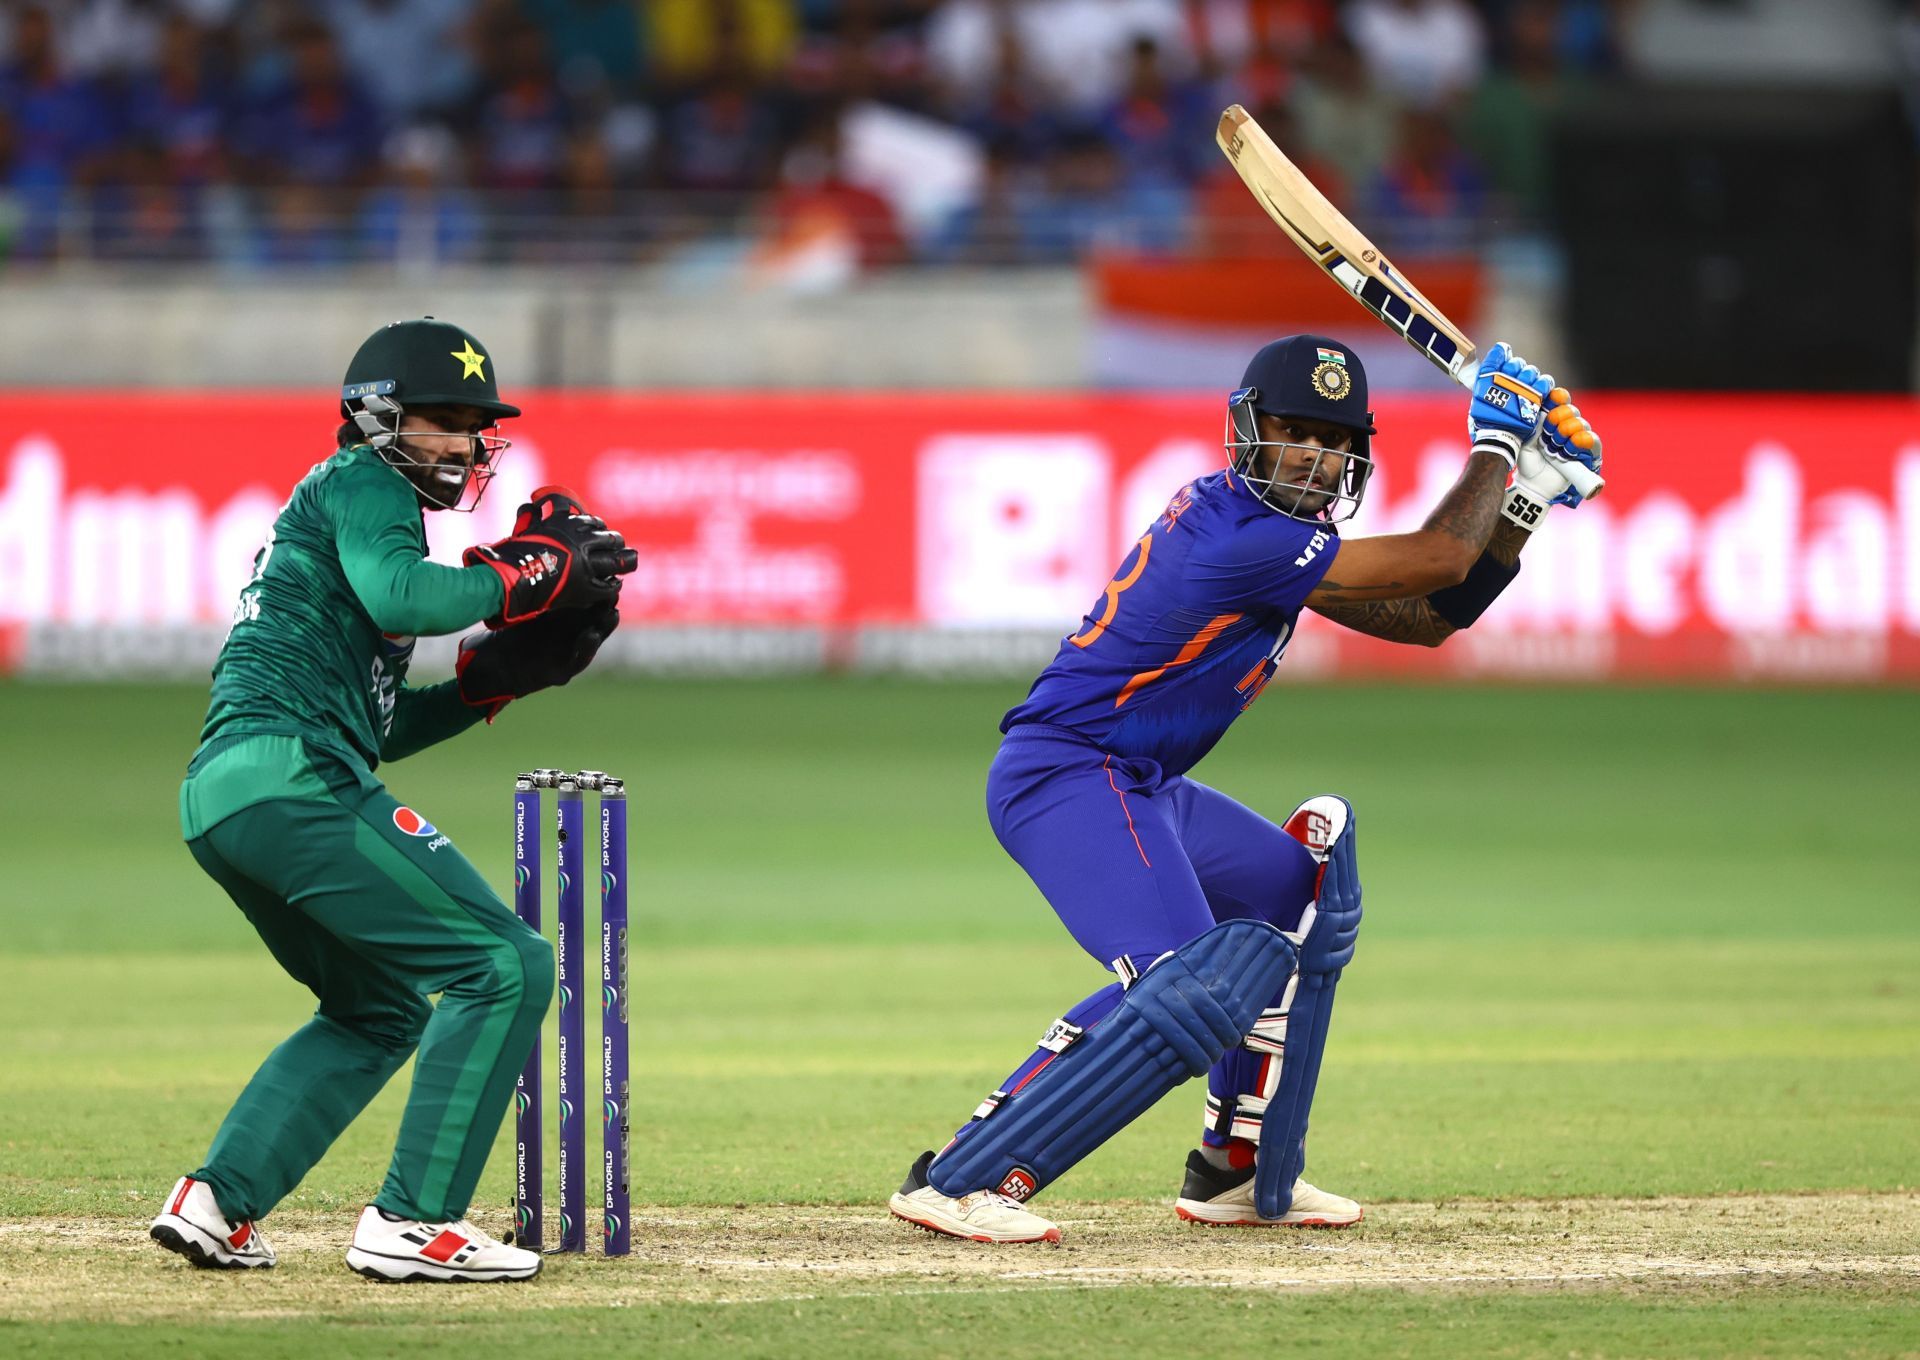 Suryakumar Yadav in action against Pakistan in Asia Cup 2022 (Credits: Getty)